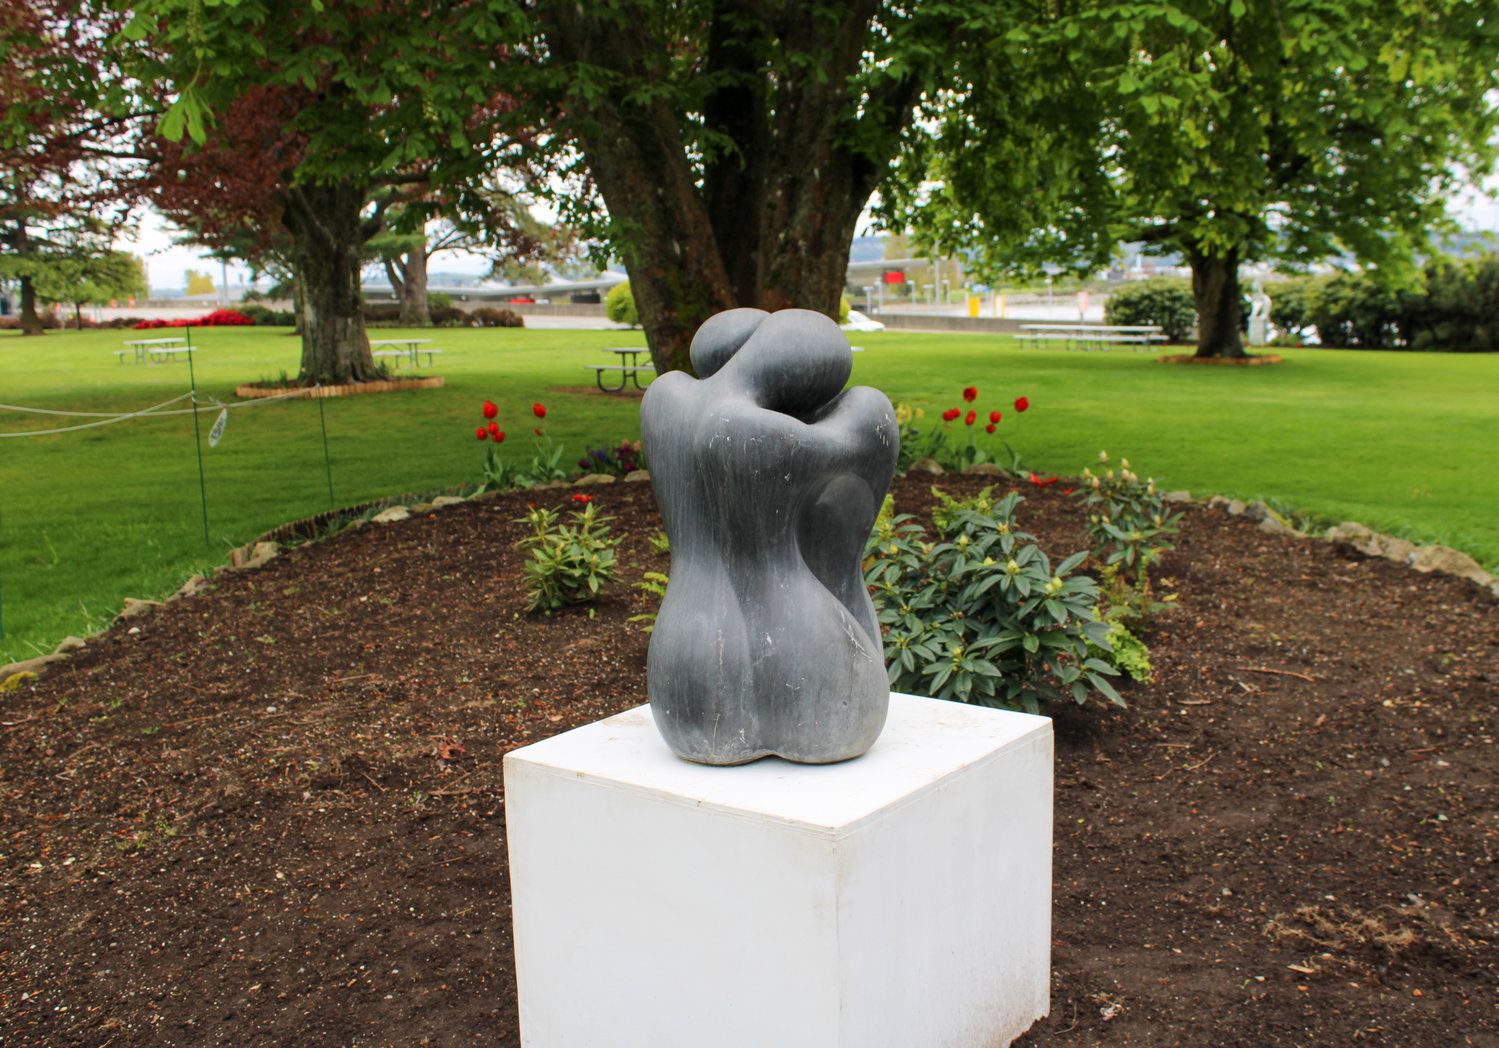 “Ying Yang” by Vancouver artist Viven Chiu displayed during the 2022 Peace Arch Park International Sculpture Exhibition.